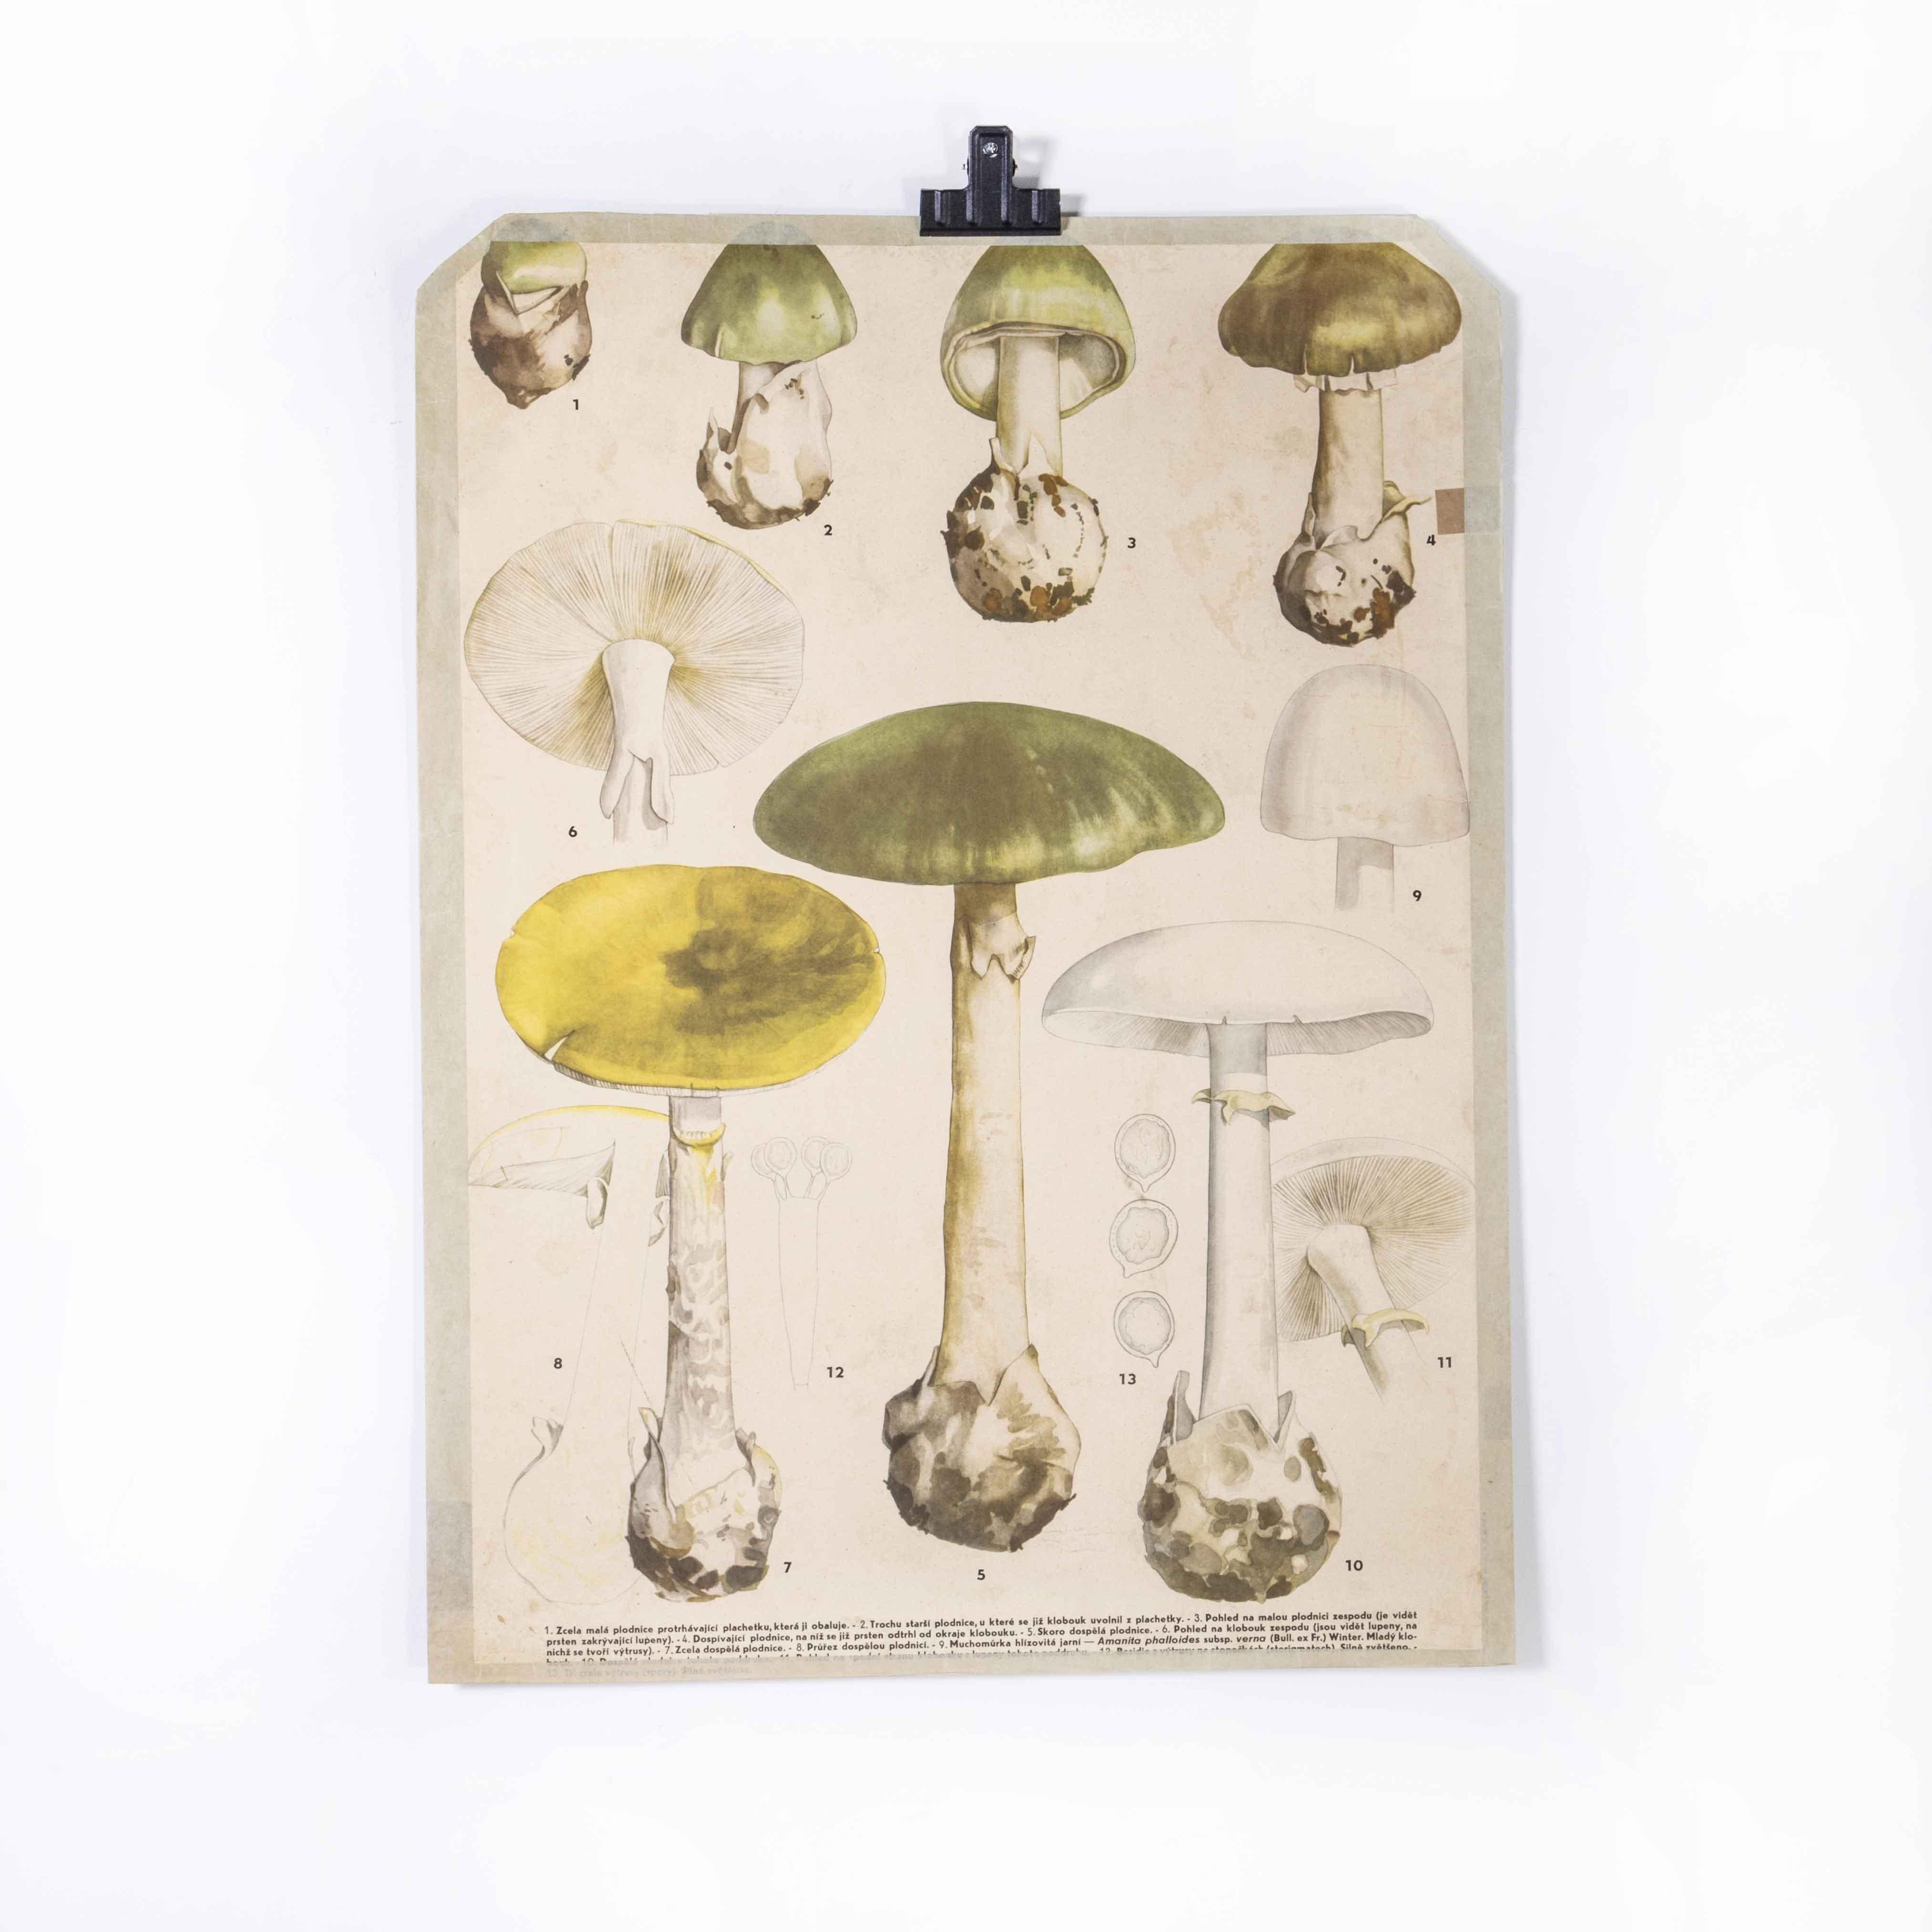 1950’s Mushroom educational poster
1950’s Mushroom educational poster. 20th century Czechoslovakian educational chart. A rare and vintage wall chart from the Czech Republic illustrating different types of mushroom. This lightweight paper chart is